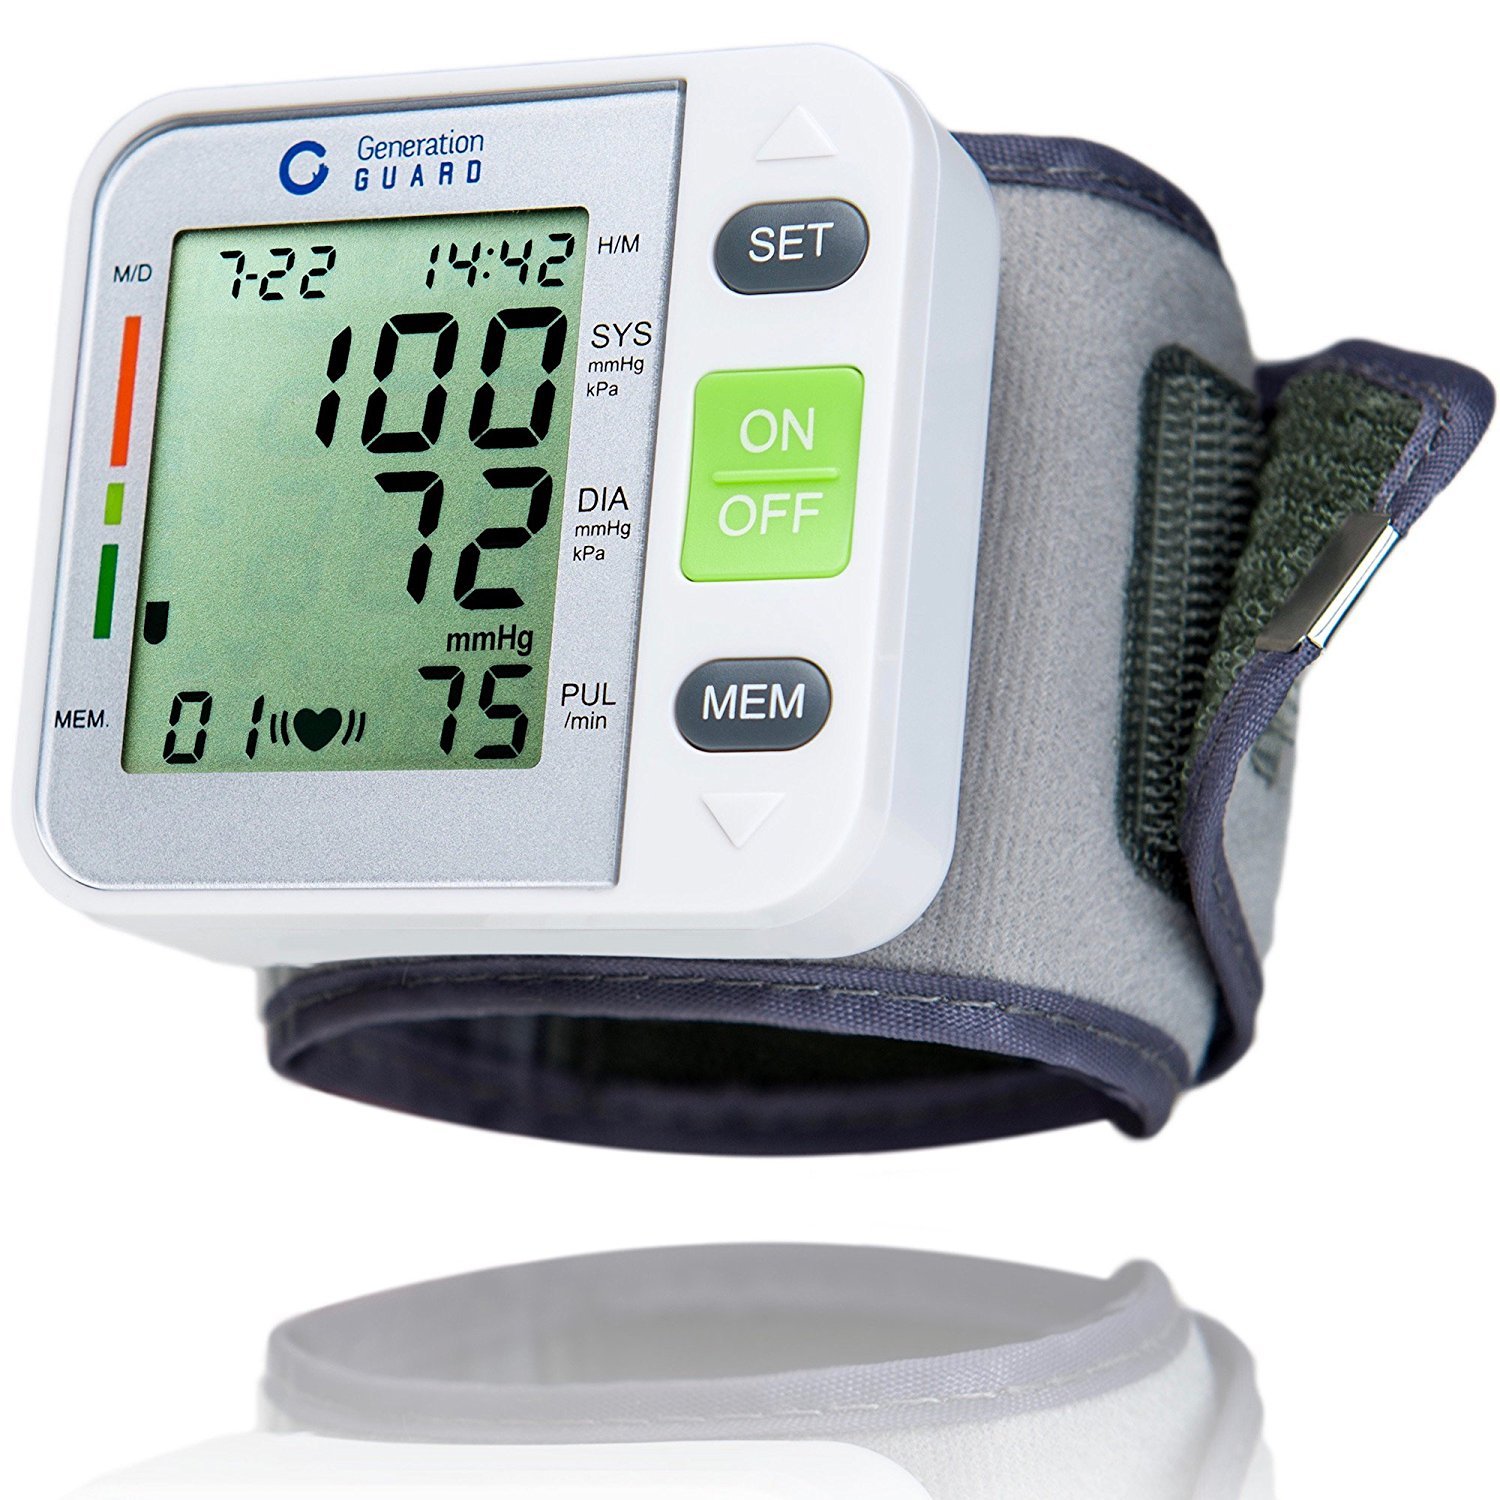 https://www.dontwasteyourmoney.com/wp-content/uploads/2020/03/generation-guard-clinical-automatic-blood-pressure-monitor-blood-pressure-monitor-for-home-use.jpg